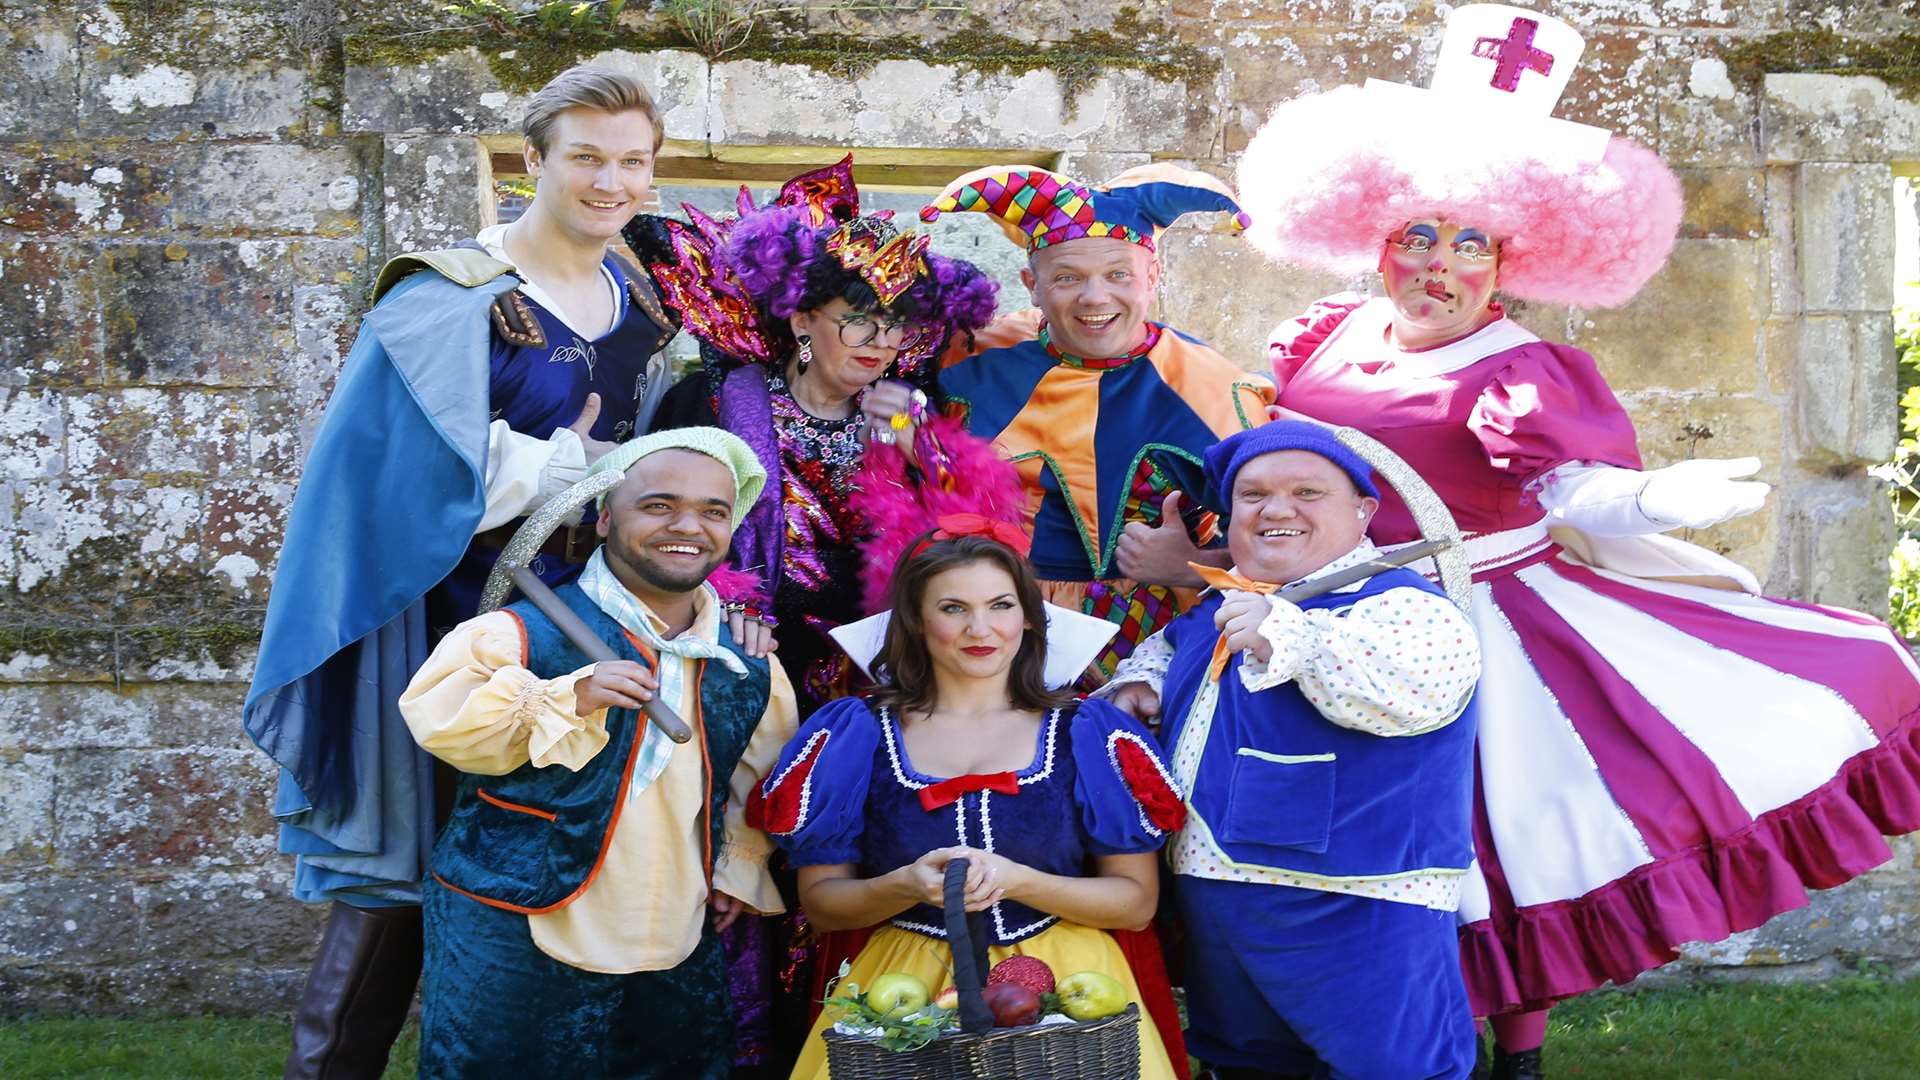 The cast of the Assembly Hall Theatre's panto, Snow White and the Seven Dwarfs